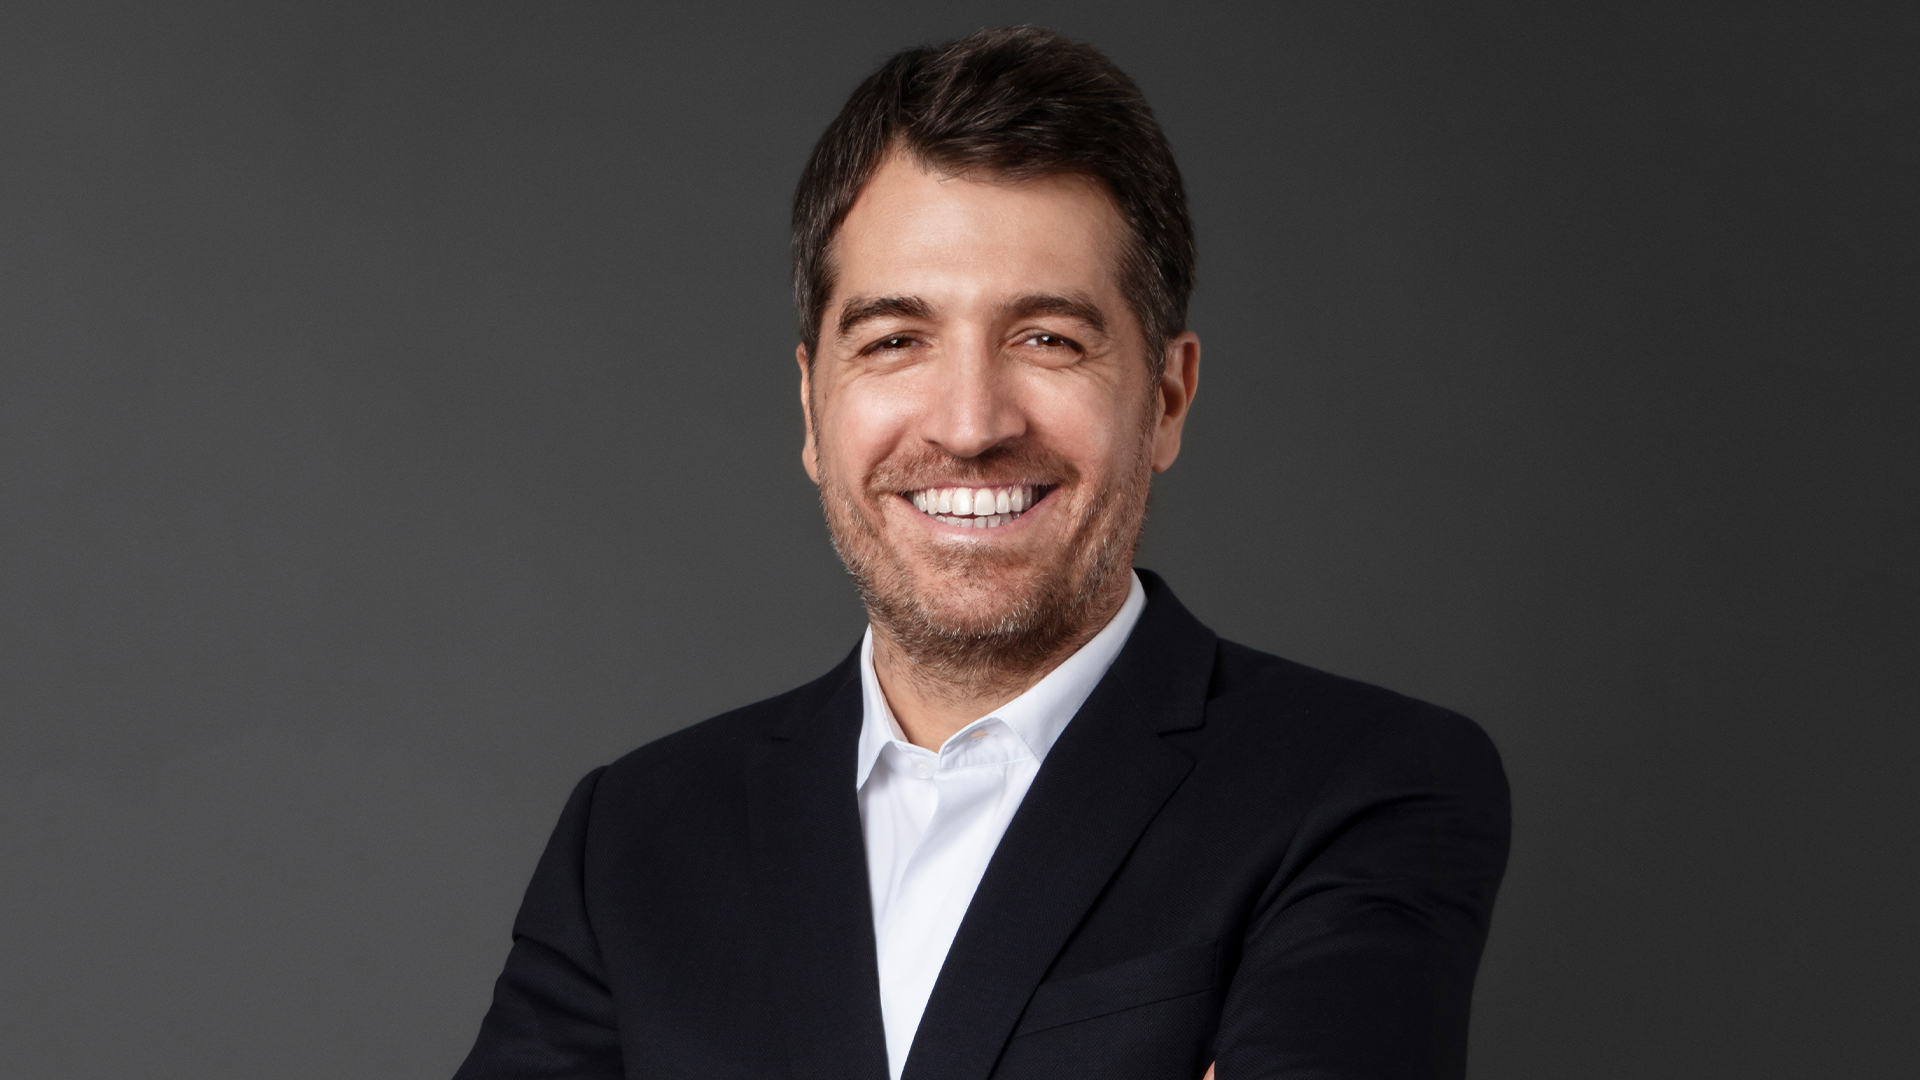 13 lessons I learned from entrepreneur Marc Chaya's talk at Station F, CEO  & co-founder of Maison Francis Kurkdjian (LVMH group), by HEC Incubator